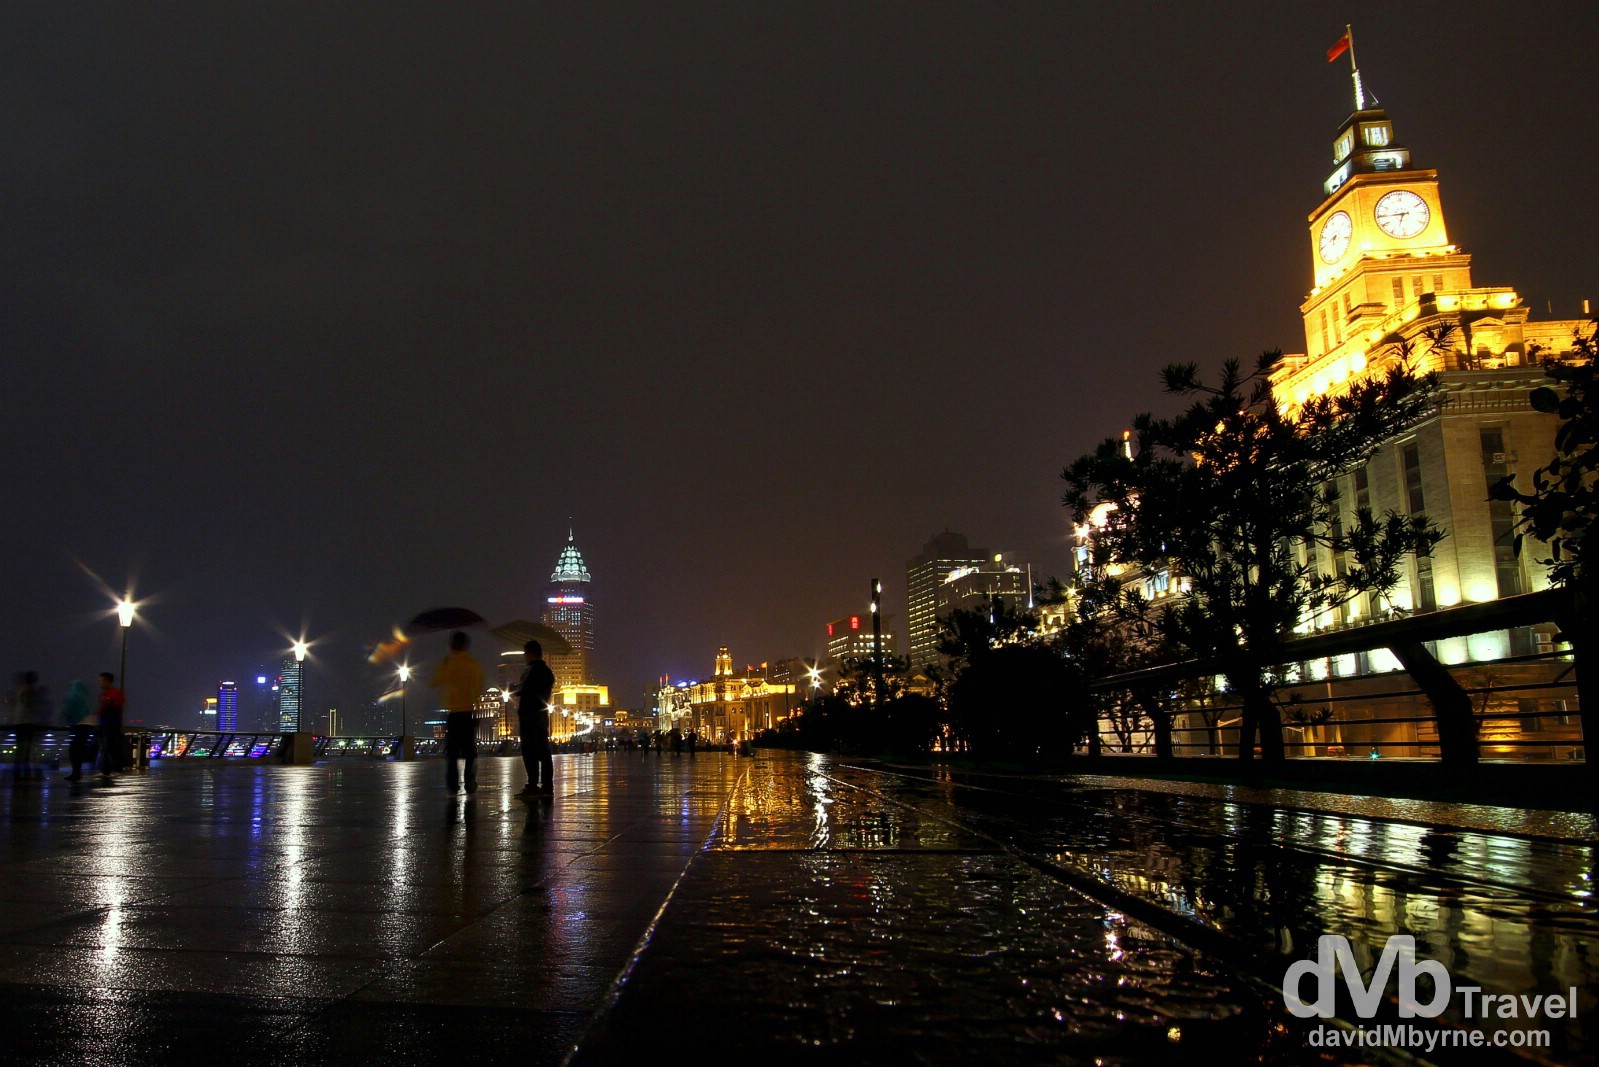 A rainy night on the Bund in Shanghai, China. October 22nd 2012.